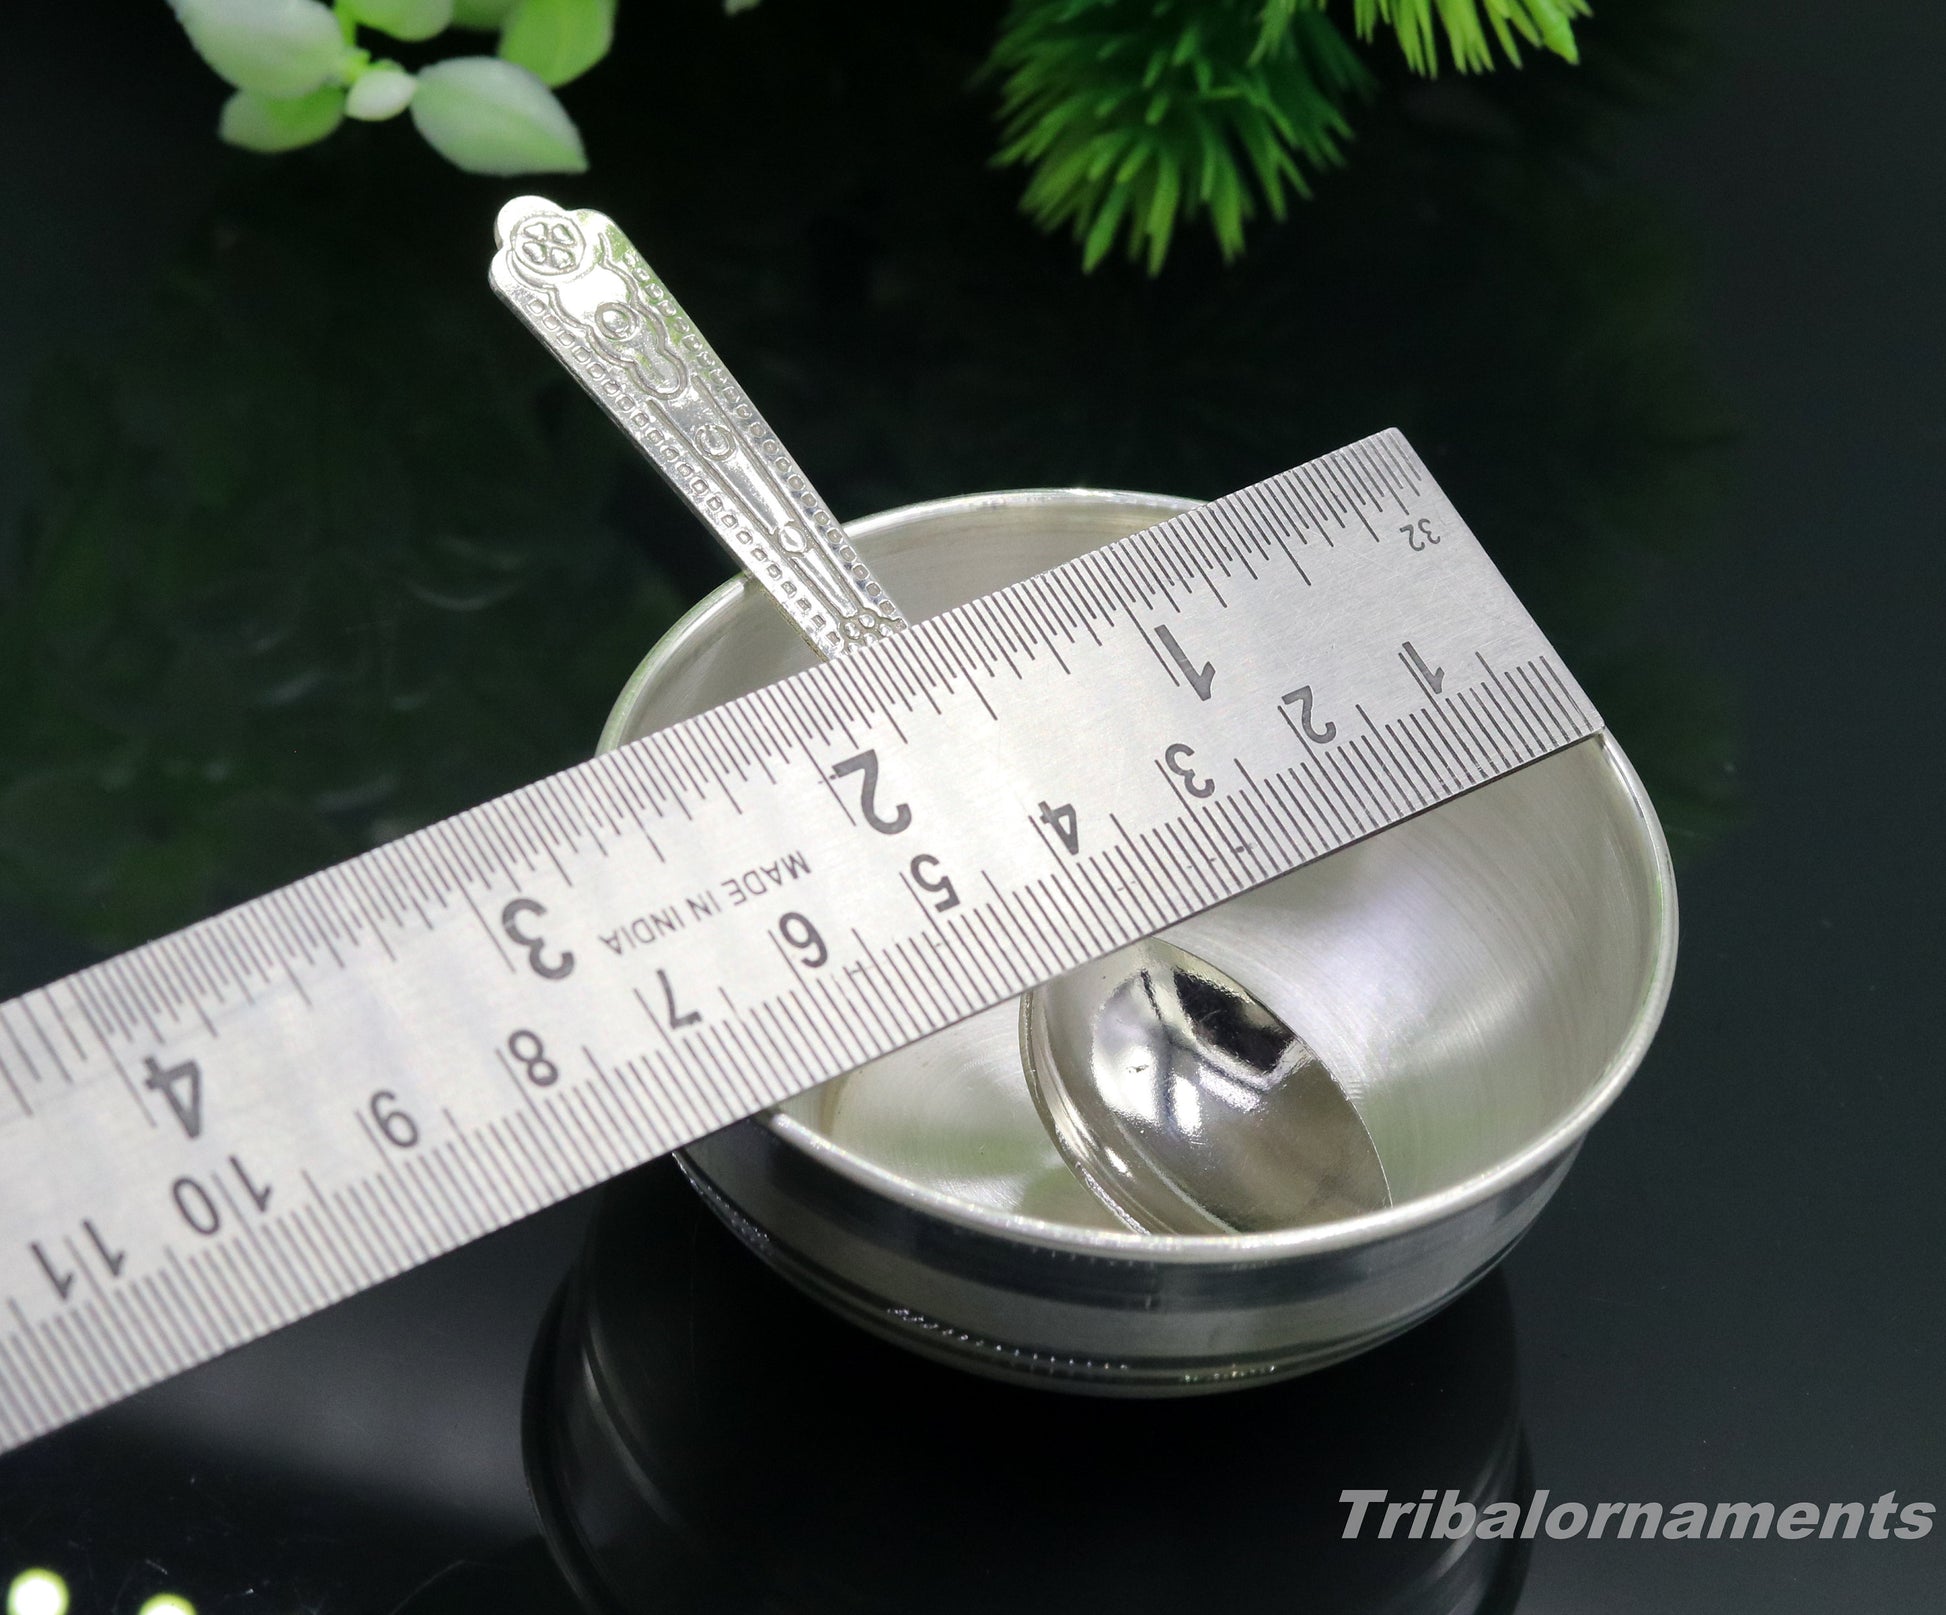 999 fine solid silver handmade small bowl for baby food, pure silver vessels, silver utensils, home and kitchen accessories india sv29 - TRIBAL ORNAMENTS